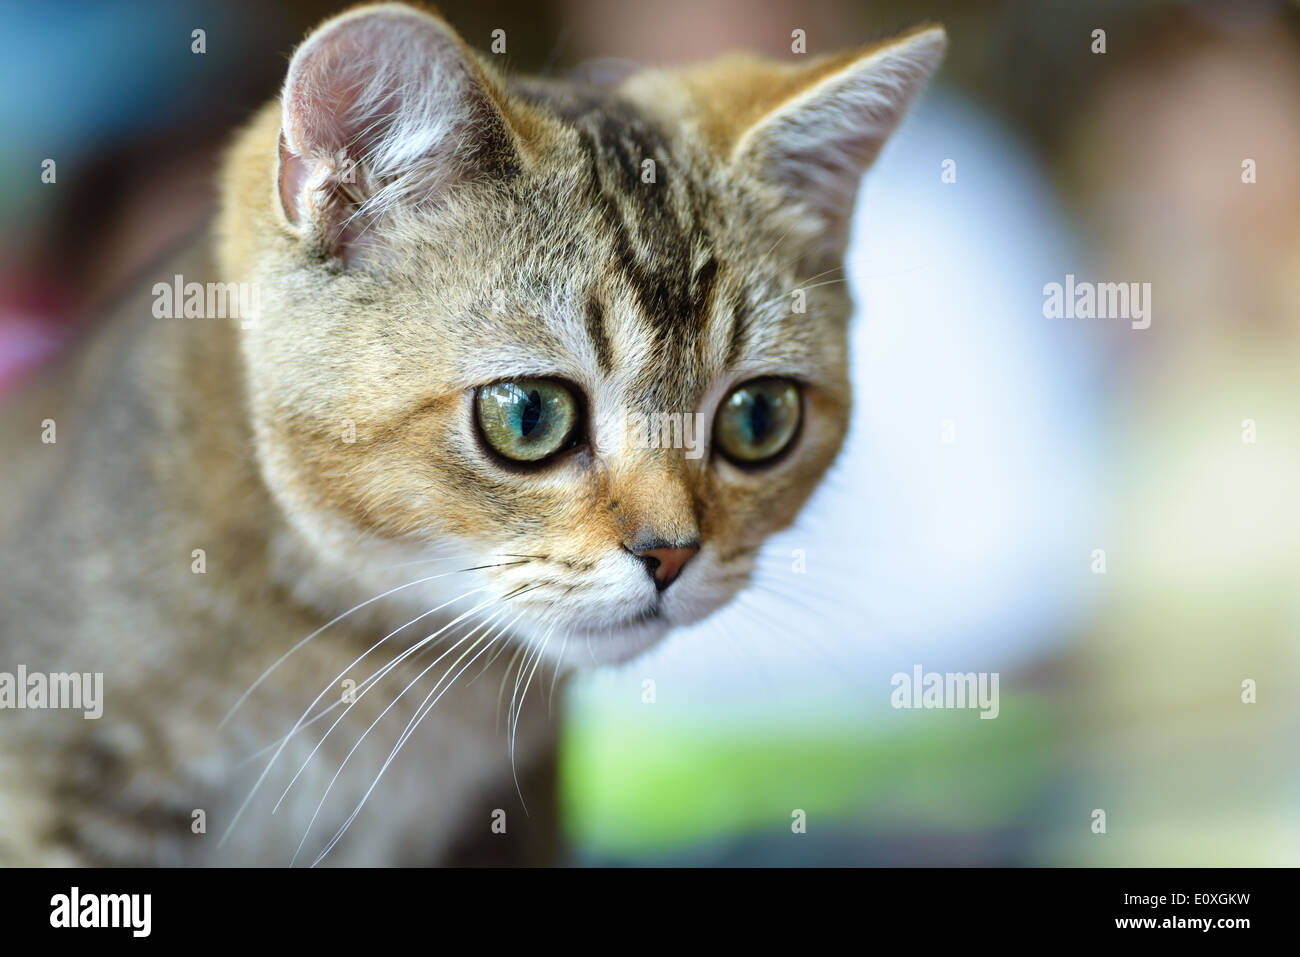 Cats and dogs: young Bengal cat, close-up portrait, selective focus, natural blurred background Stock Photo